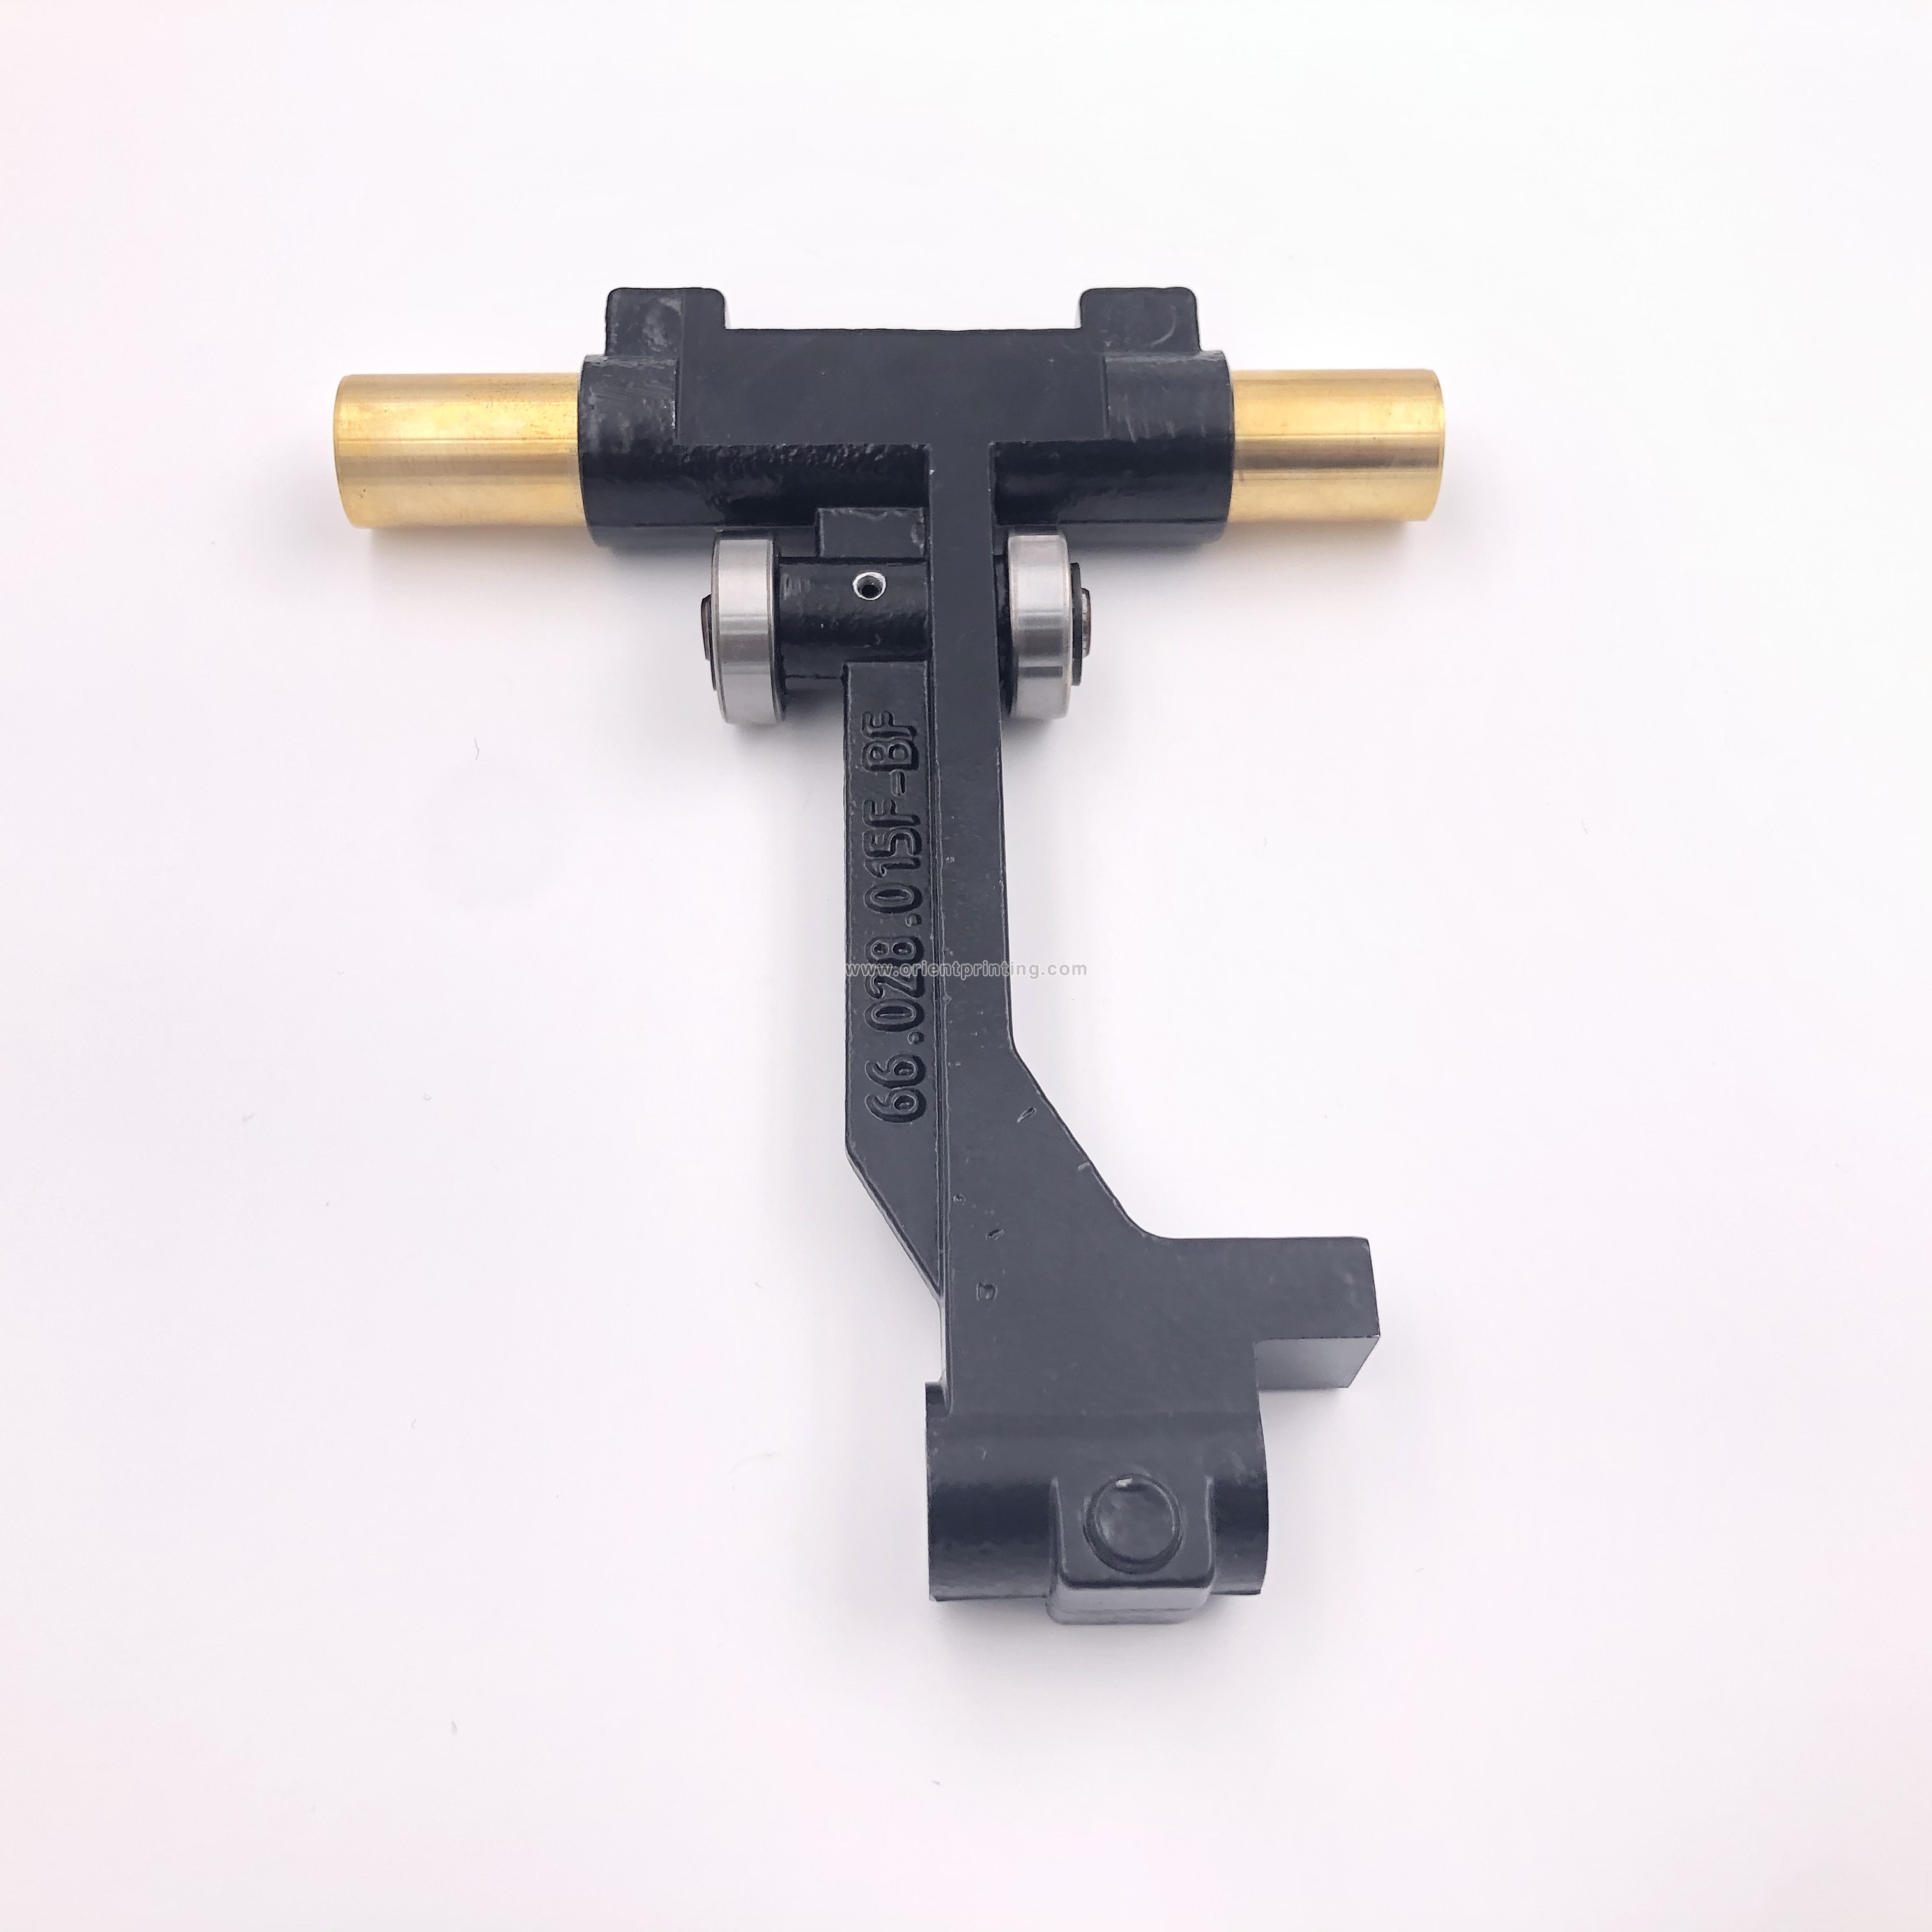 66.028.015F Support Feeder Guide Lever For Sm74 SM102 CD102 Printing Machine